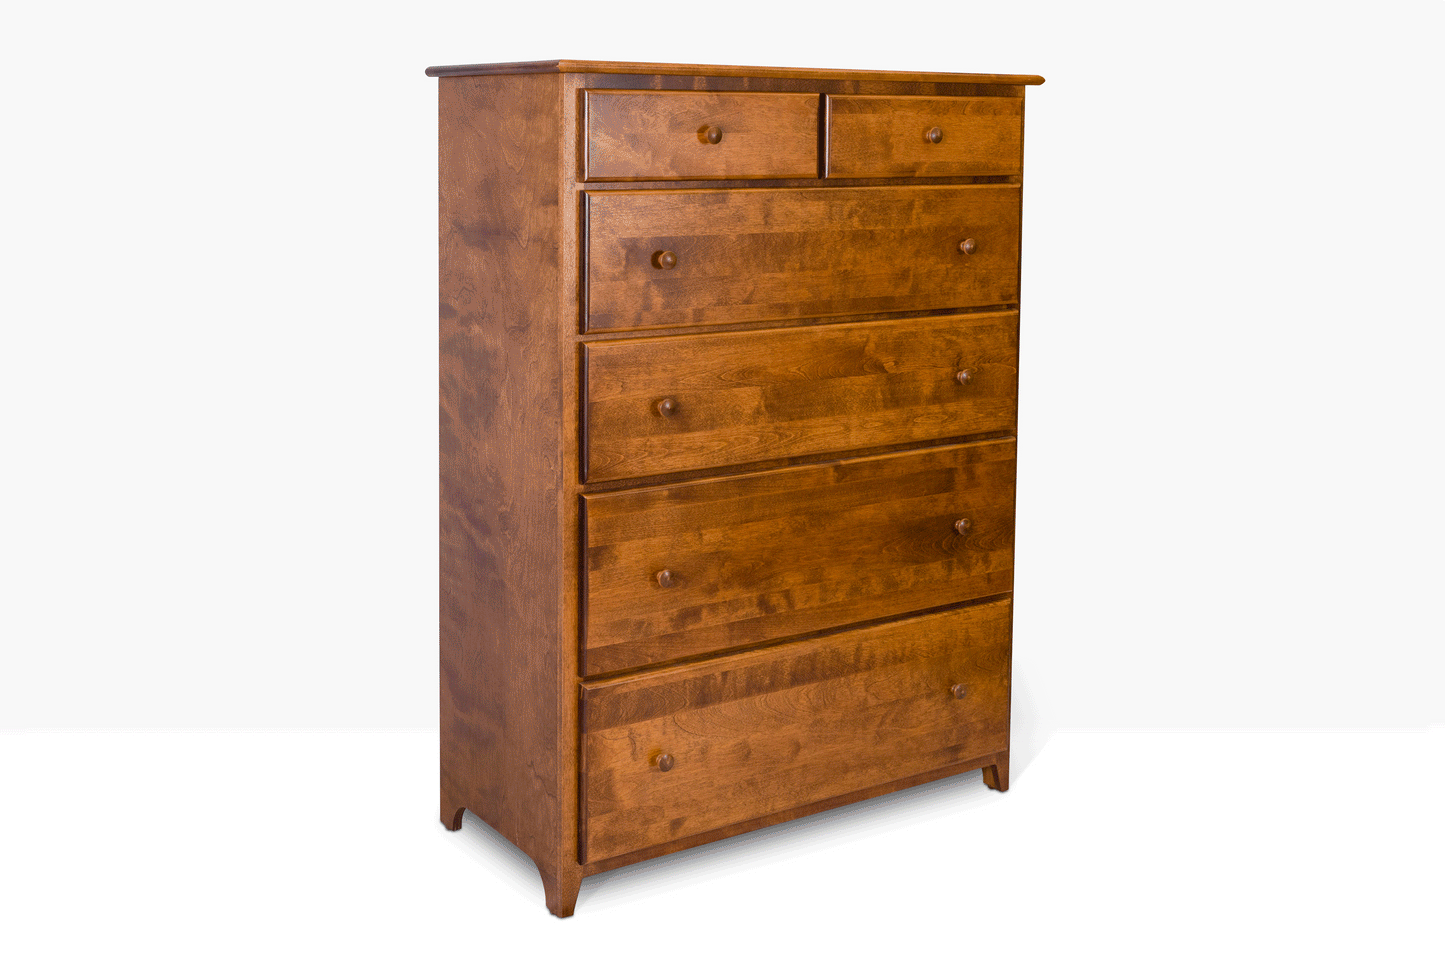 Acadia Shaker Chest with Split Top Drawer with four large drawers and two small drawers. Pictured in Walnut finish with drawers open to highlight storage space.